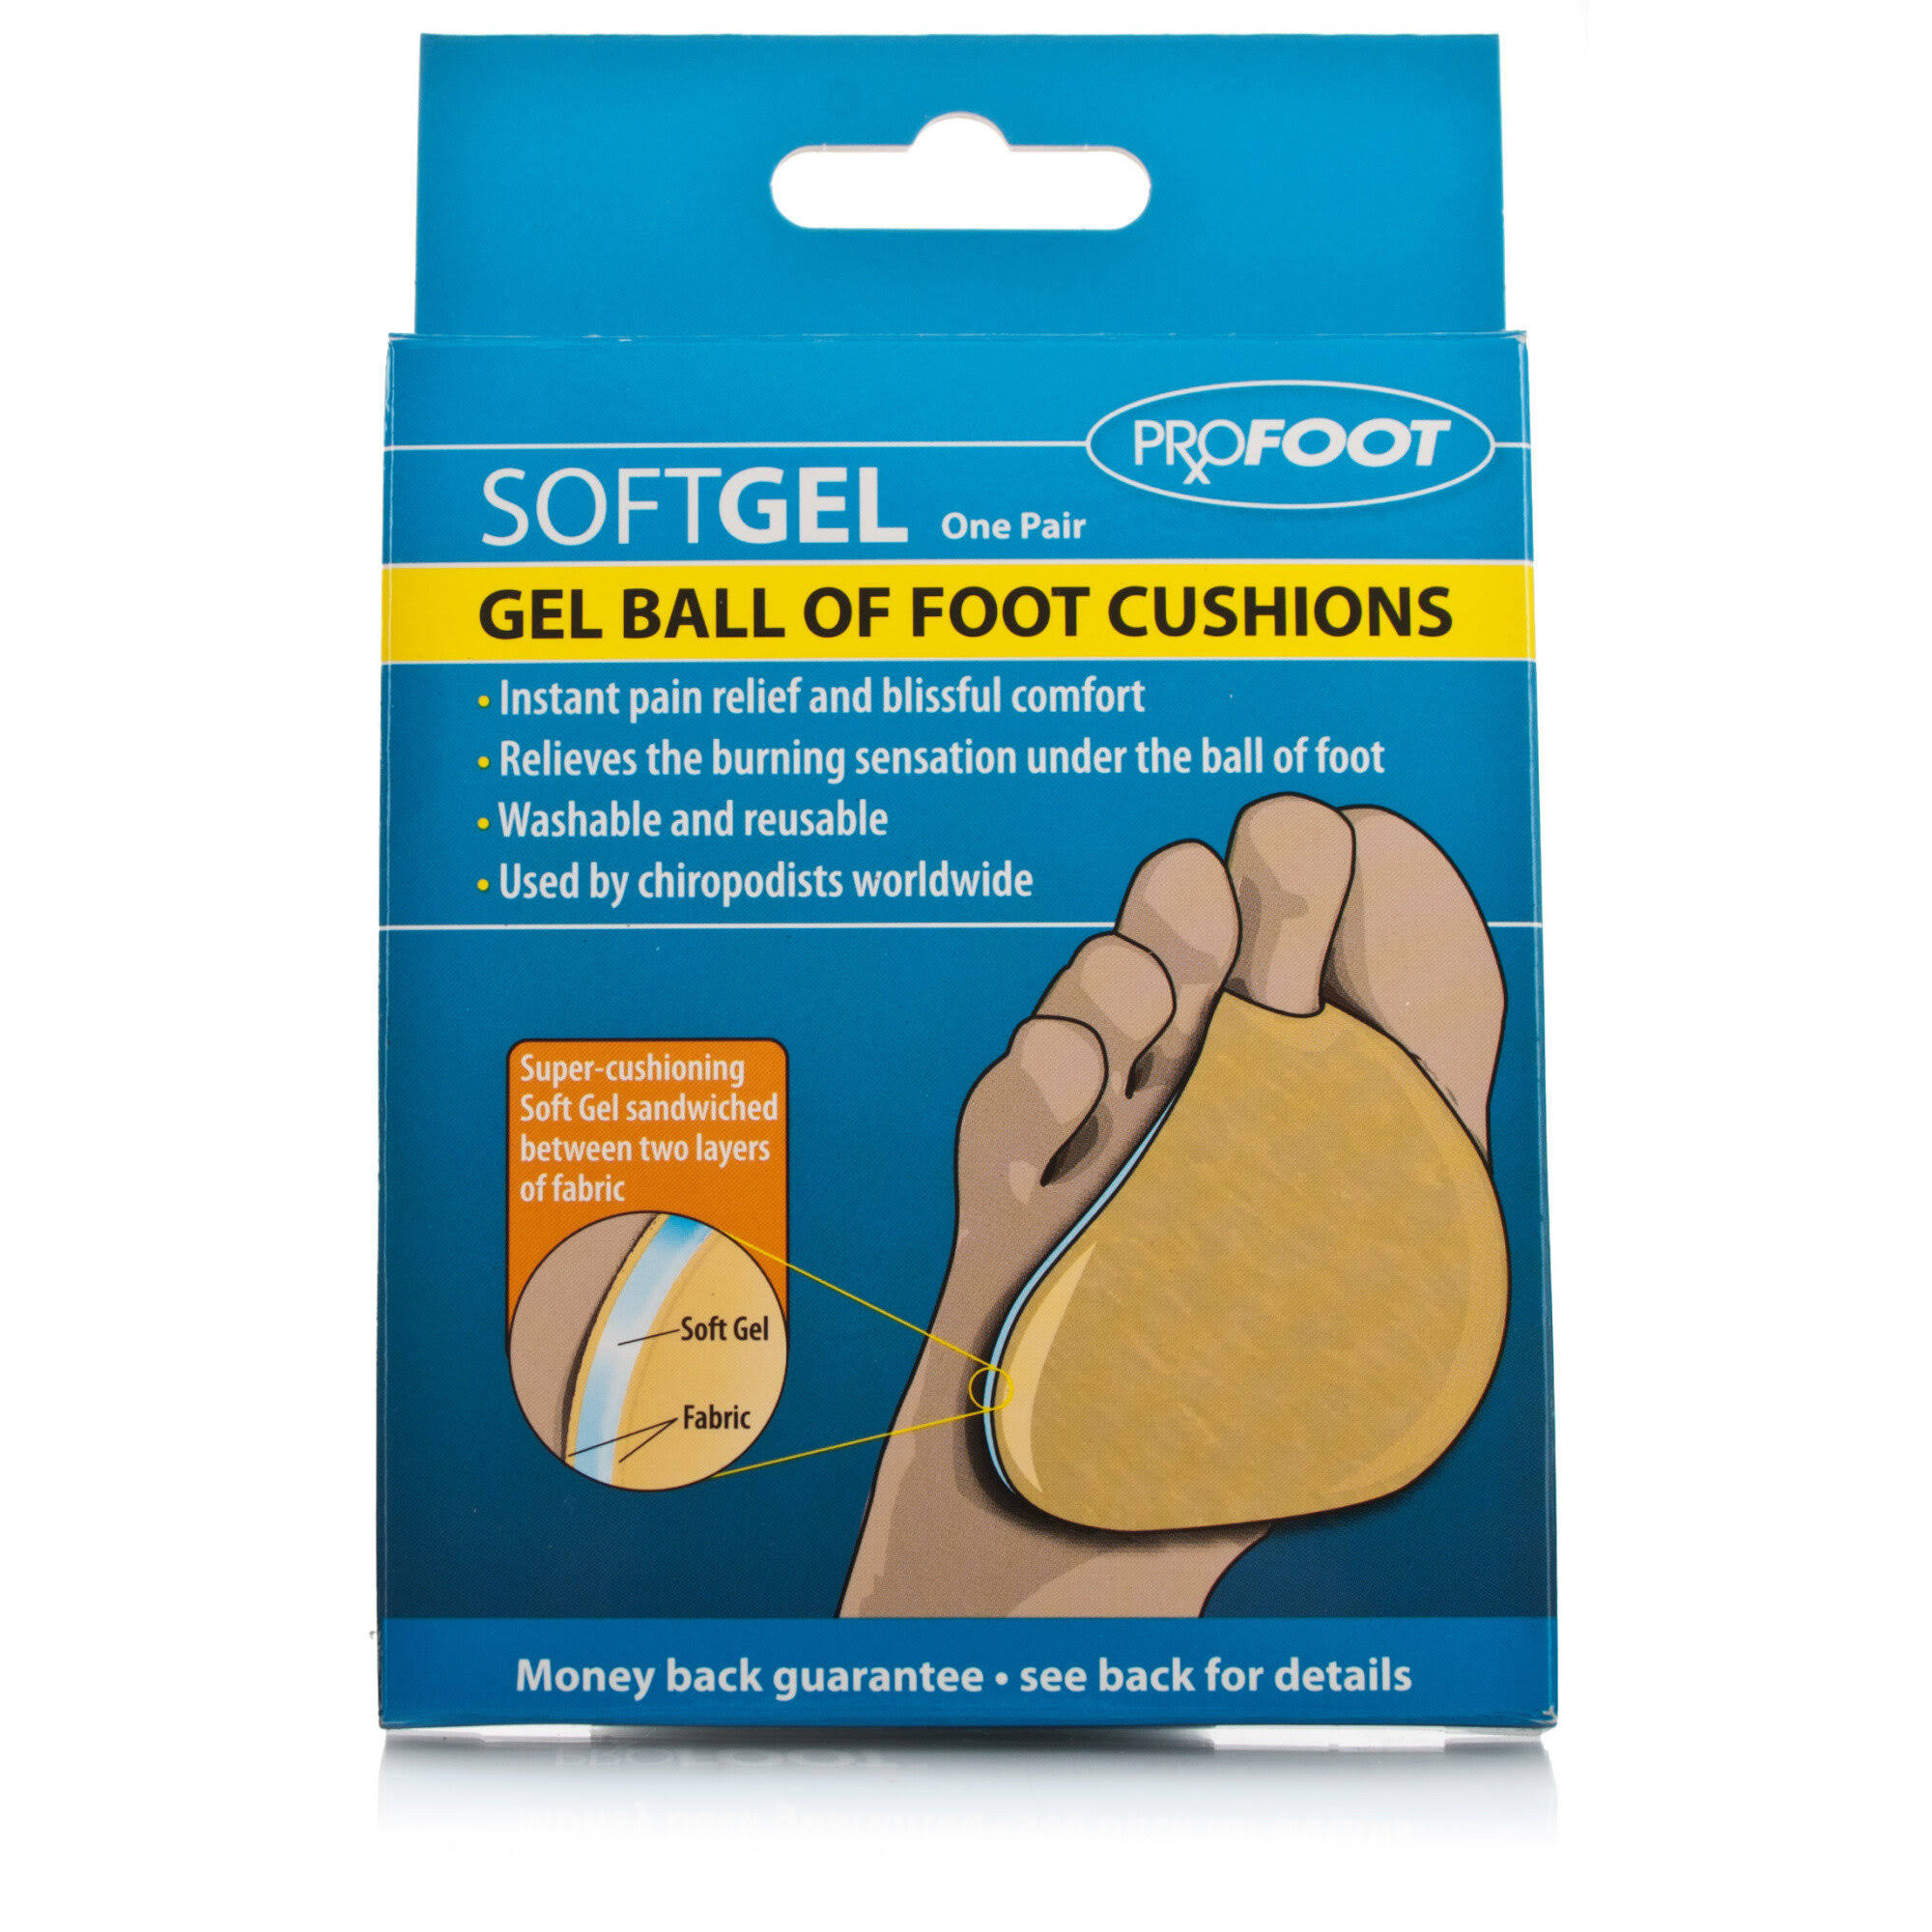 Profoot Soft Gel Ball of Foot Cushions